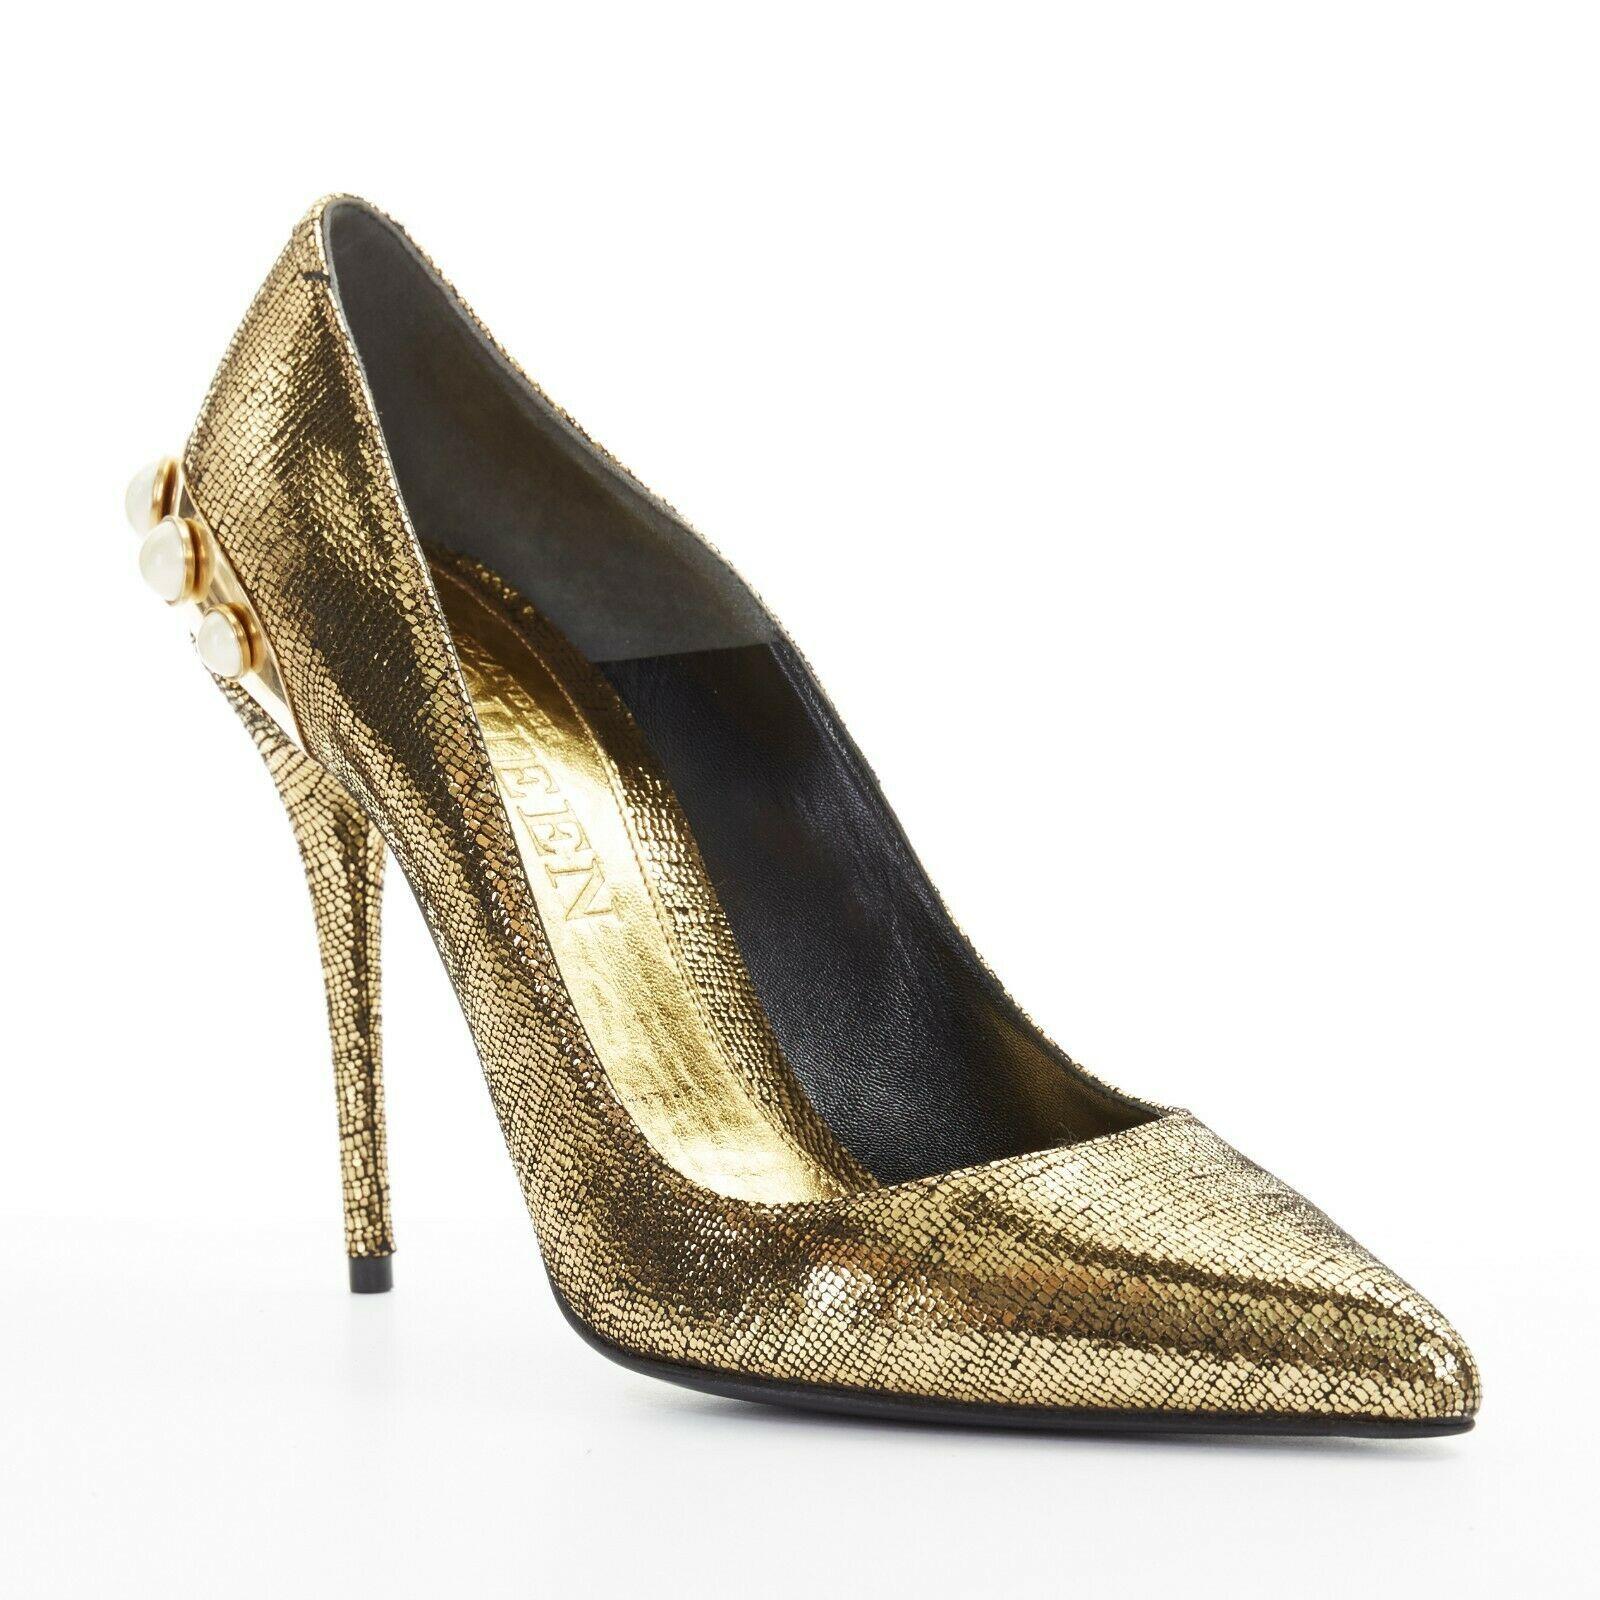 new ALEXANDER MCQUEEN metallic gold leather pearl embellished pointy heel EU38
ALEXANDER MCQUEEN
Metallic gold leather upper. 
Gold-tone metal hardware with faux pearl embellishment at heel. 
Slim high heel. 
Pointed toe. 
Padded gold leather